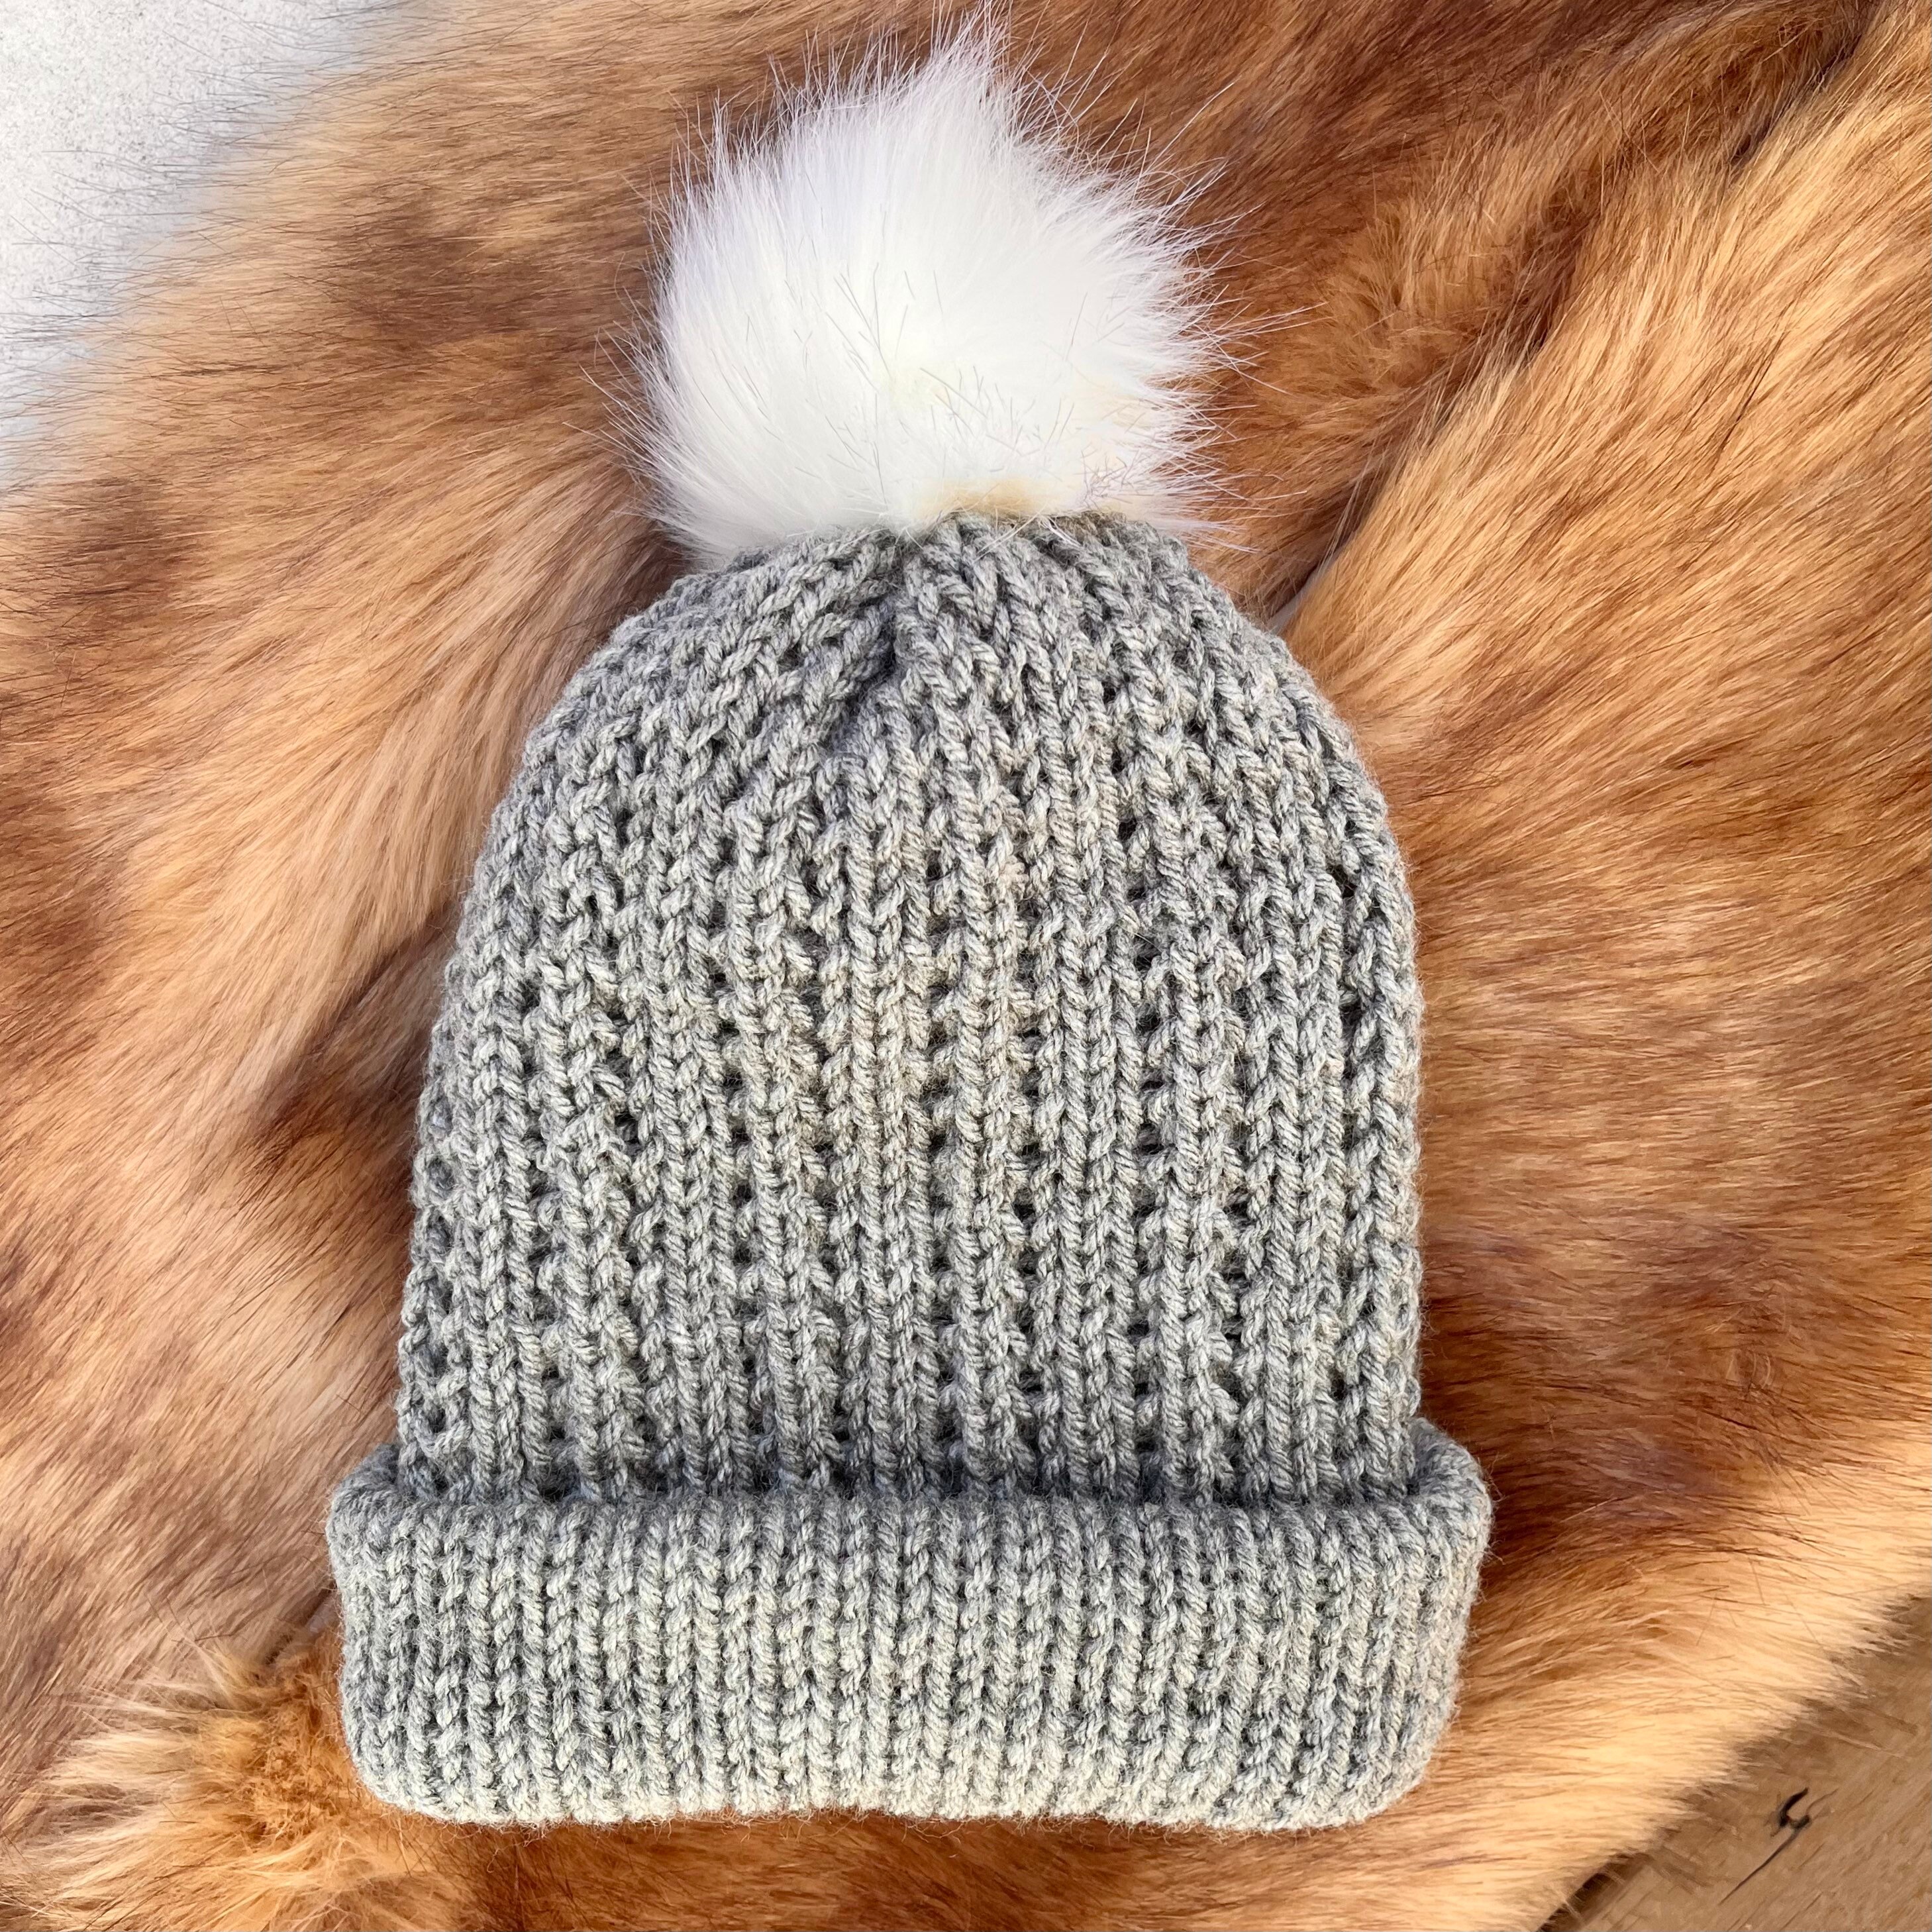 MUNDANE MYSTERIES: Why do winter hats have pom-poms on top?